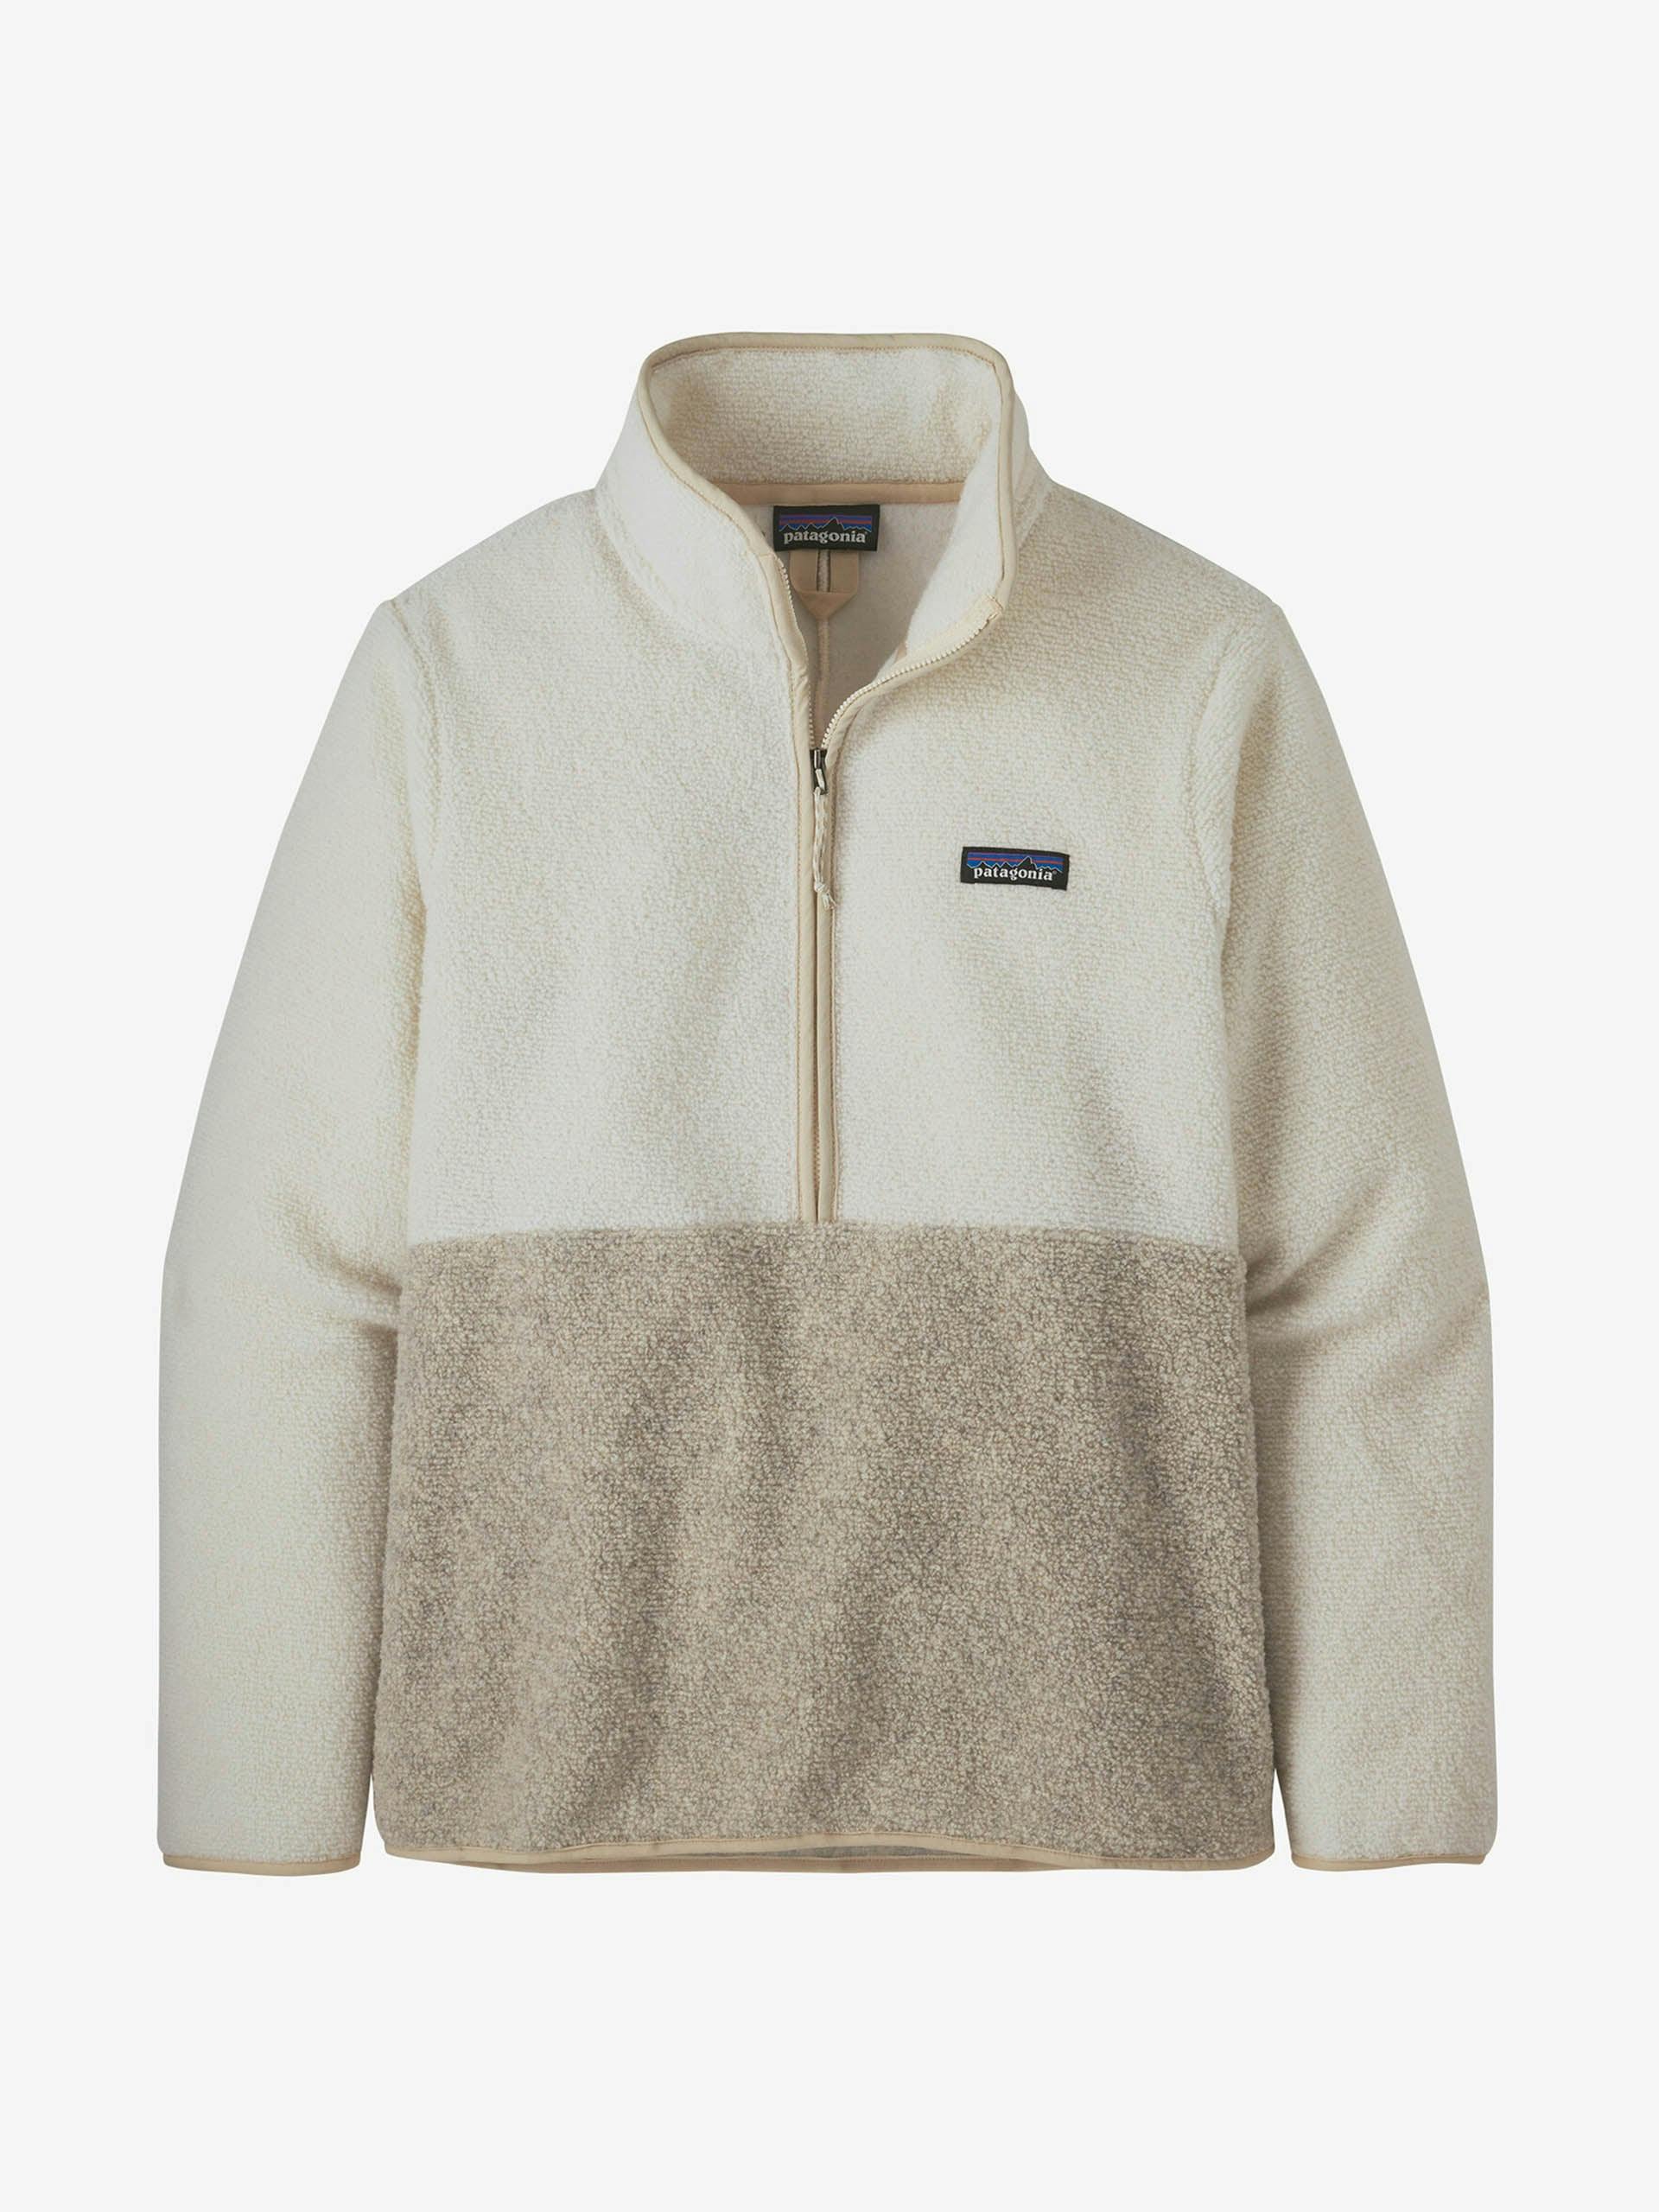 White and beige fleece pullover